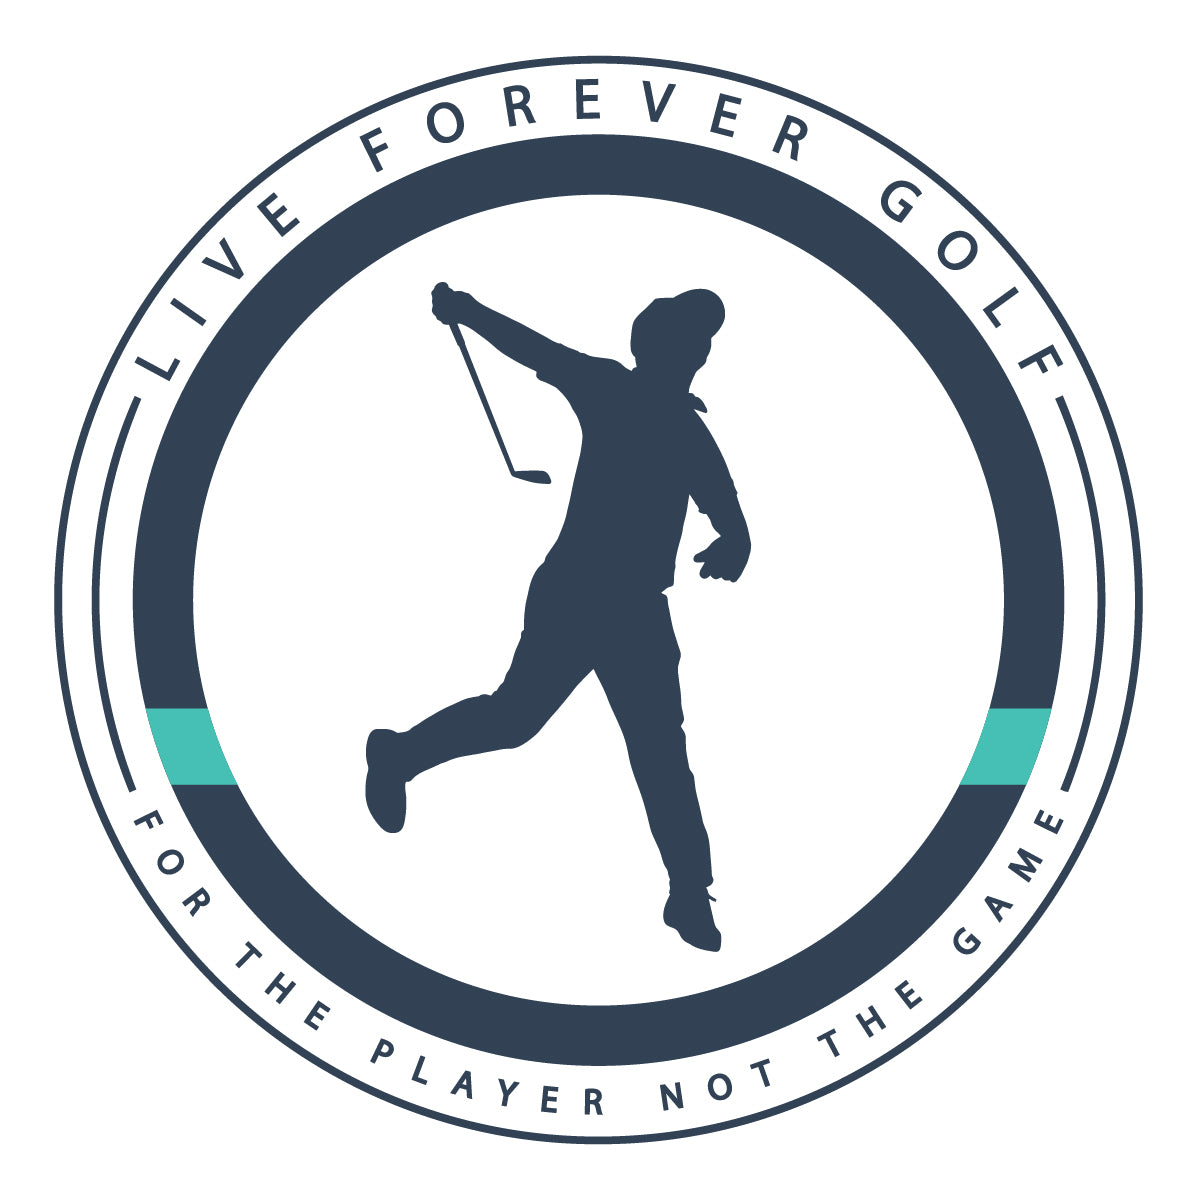 Don't Miss Out On This Limited Time Deal! - Live Forever Golf